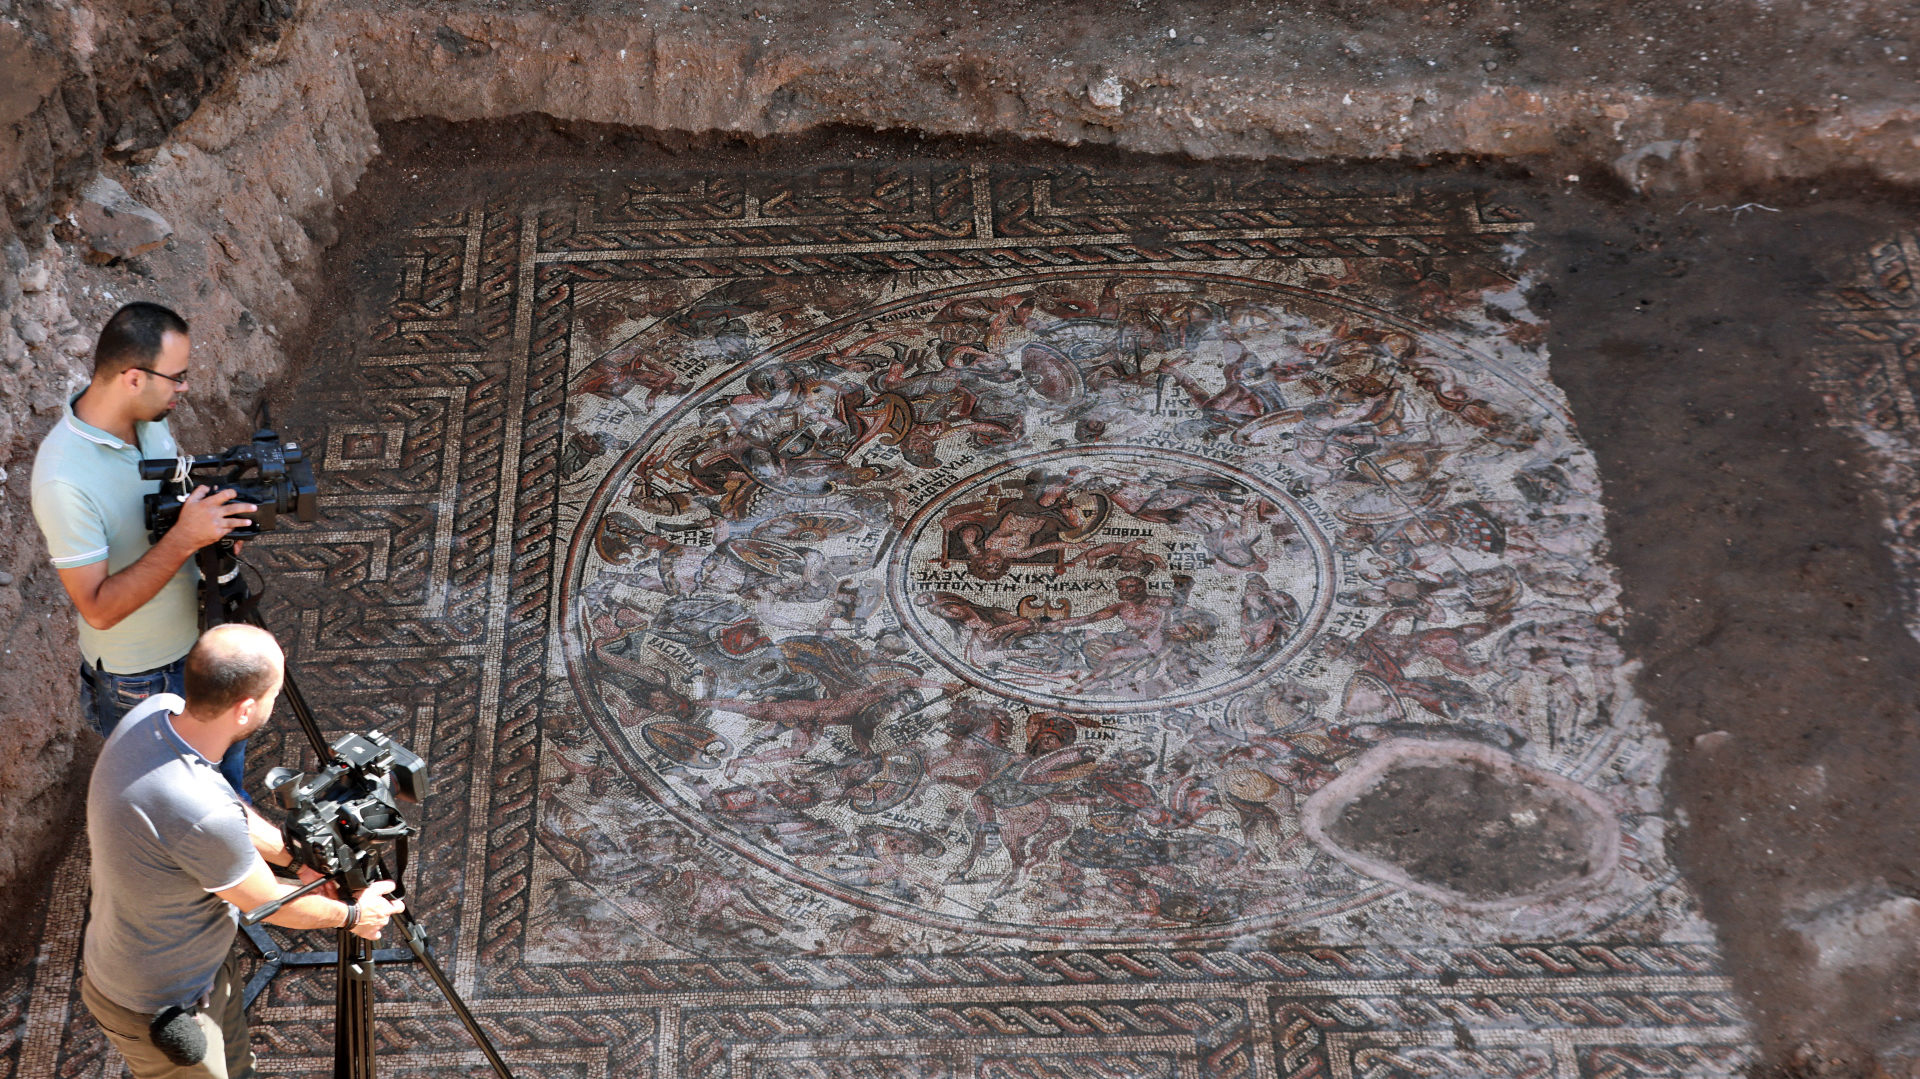 Large Roman-era Mosaic Discovered in Syria’s Homs Province